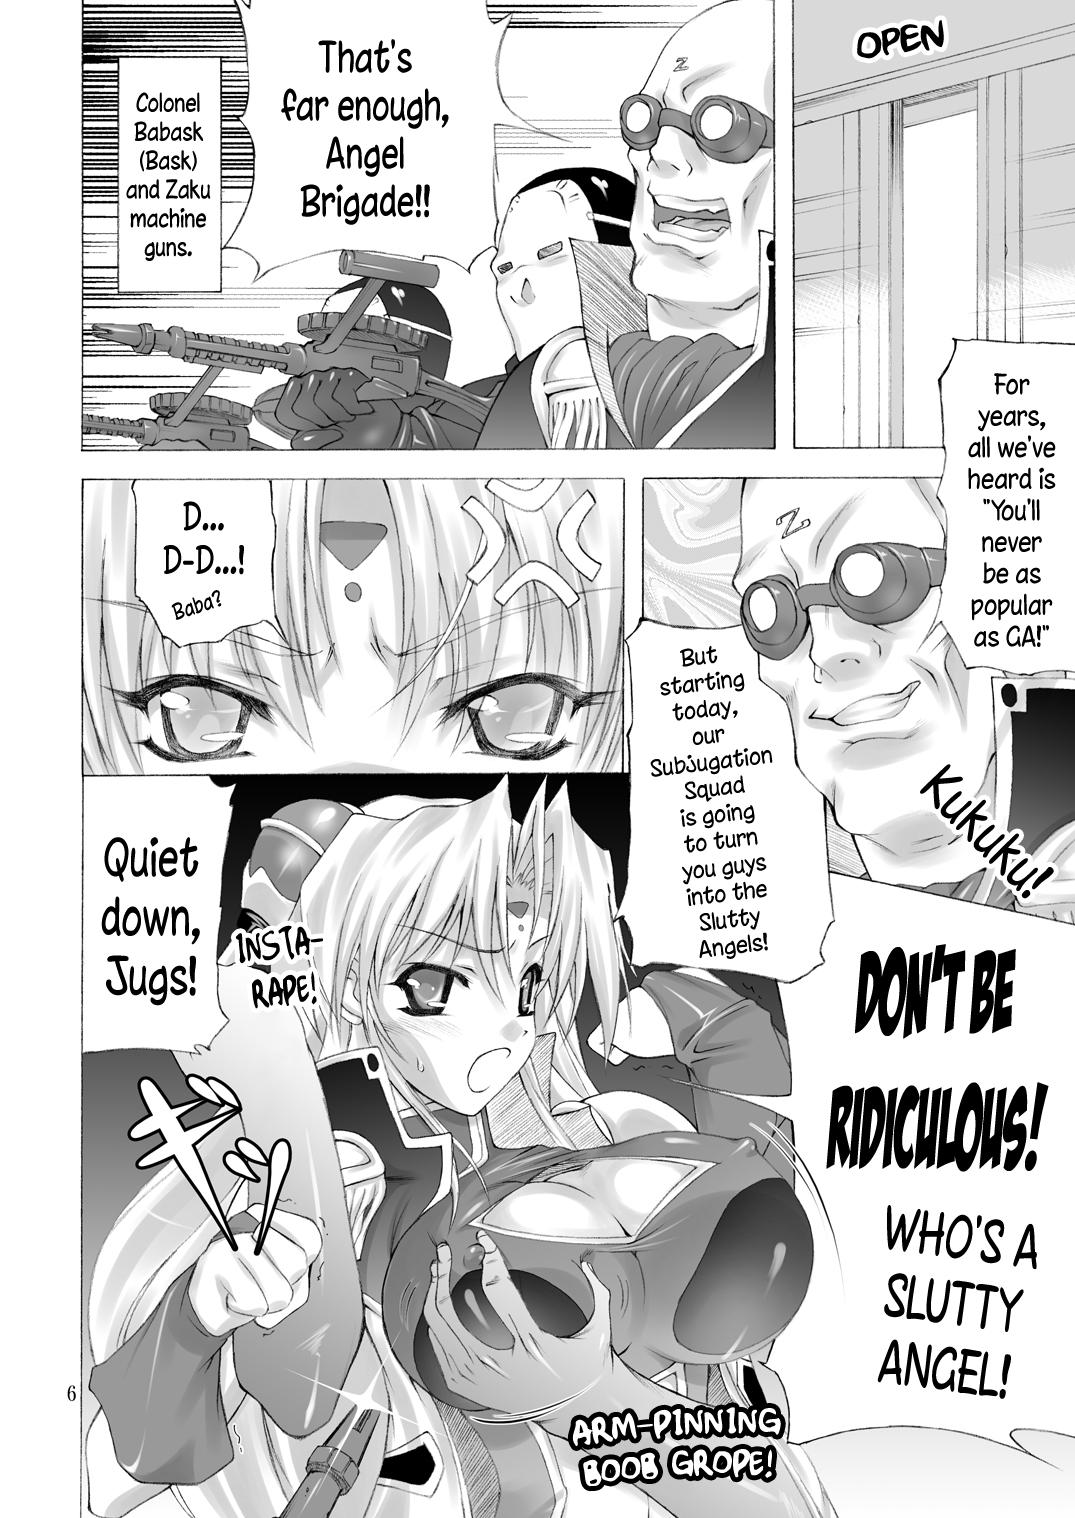 Coed Super Rinpha Time! - Galaxy angel Pussylick - Page 5